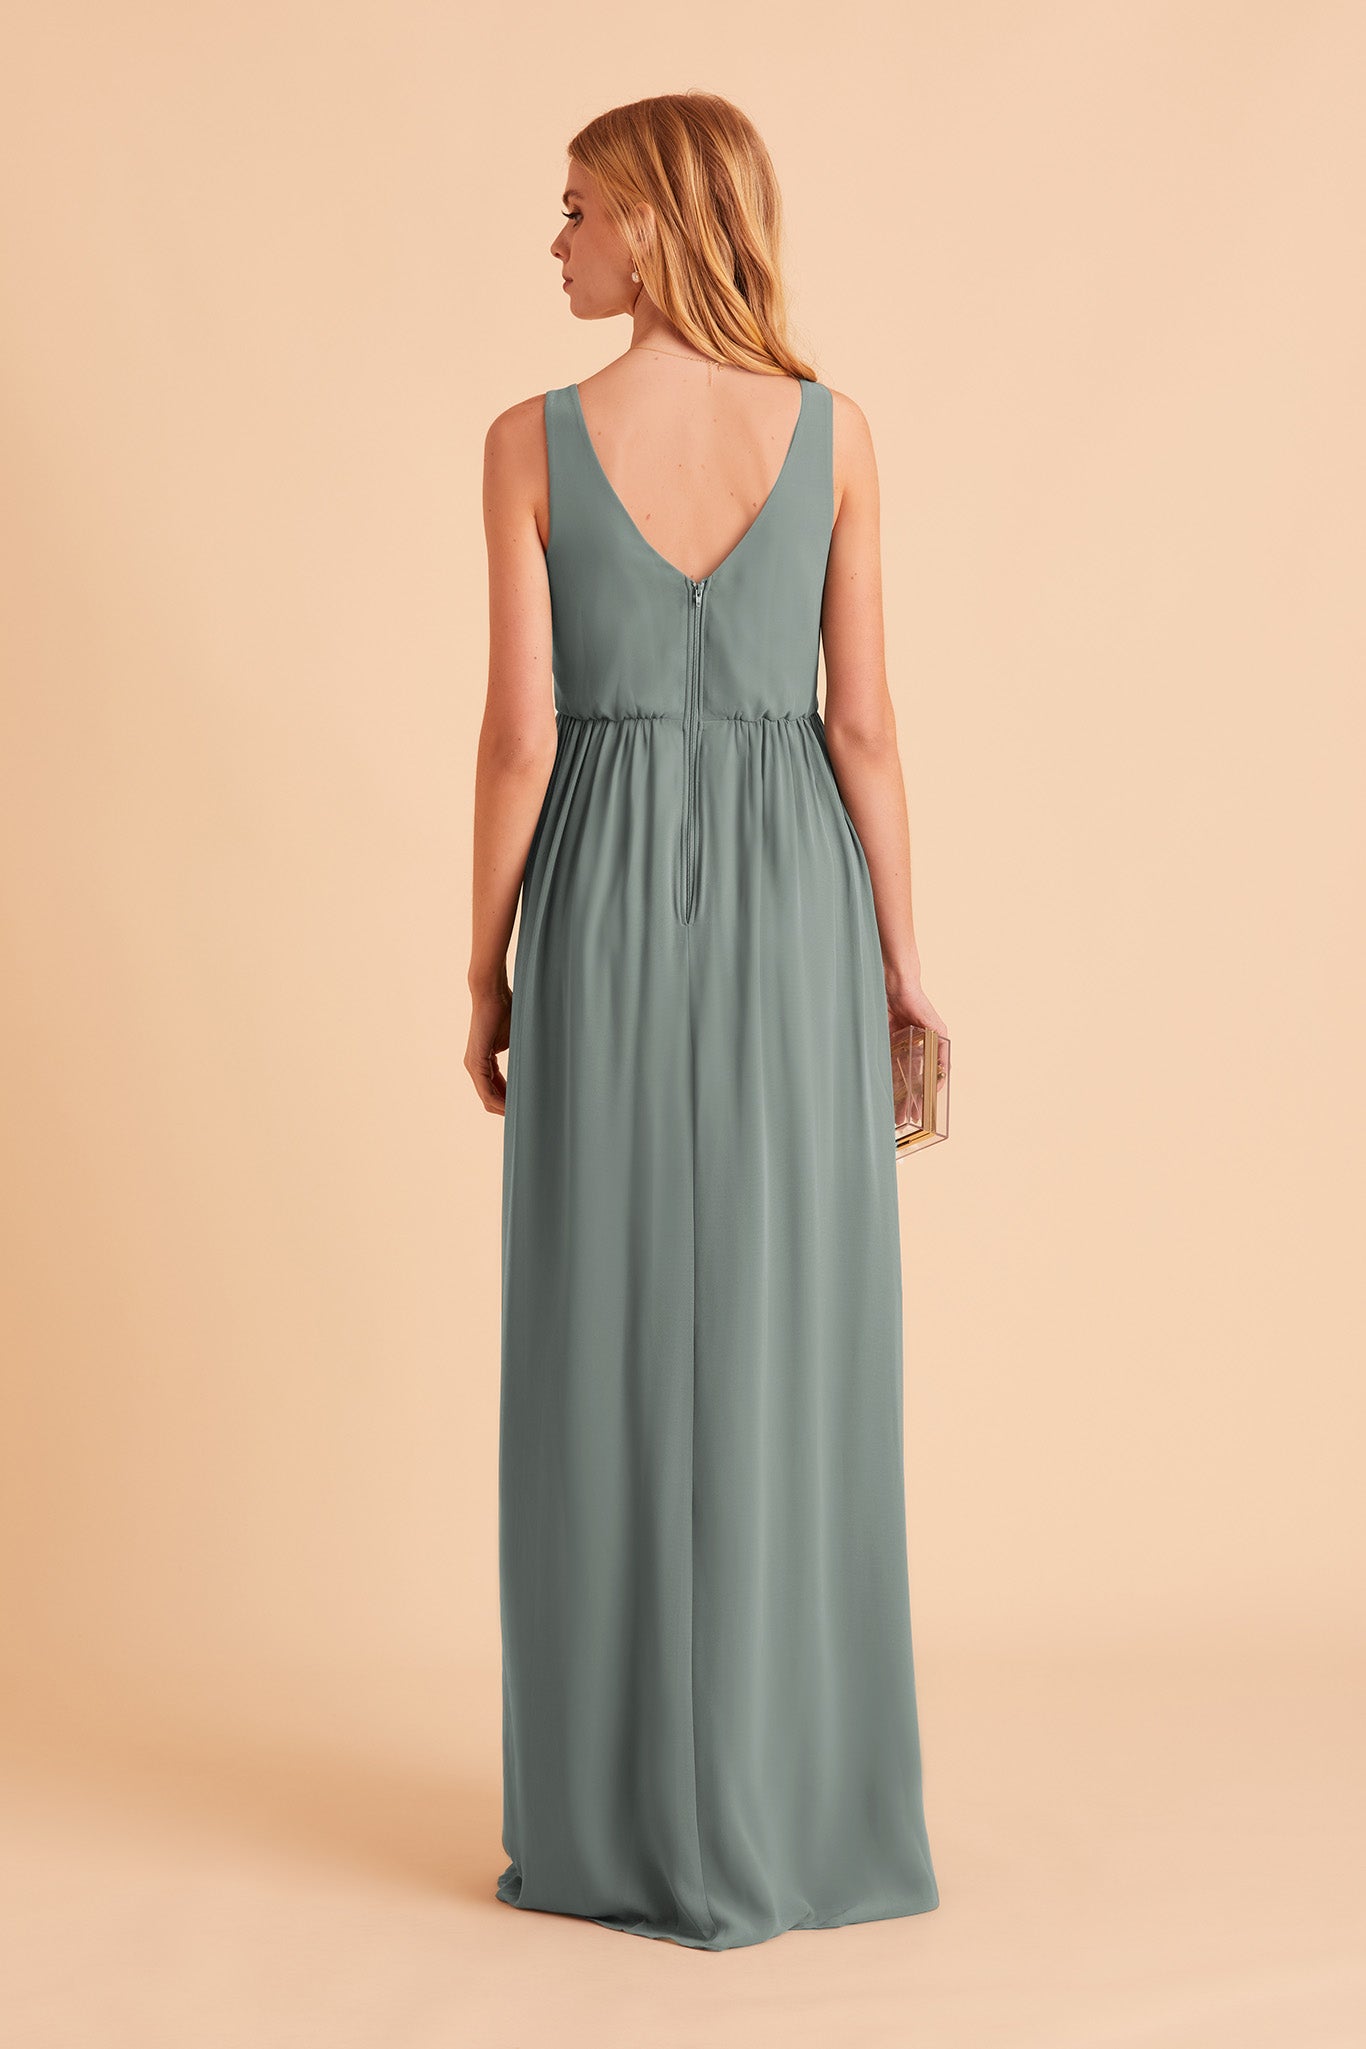 Laurie Empire bridesmaid dress with slit in sea glass chiffon by Birdy Grey, back view